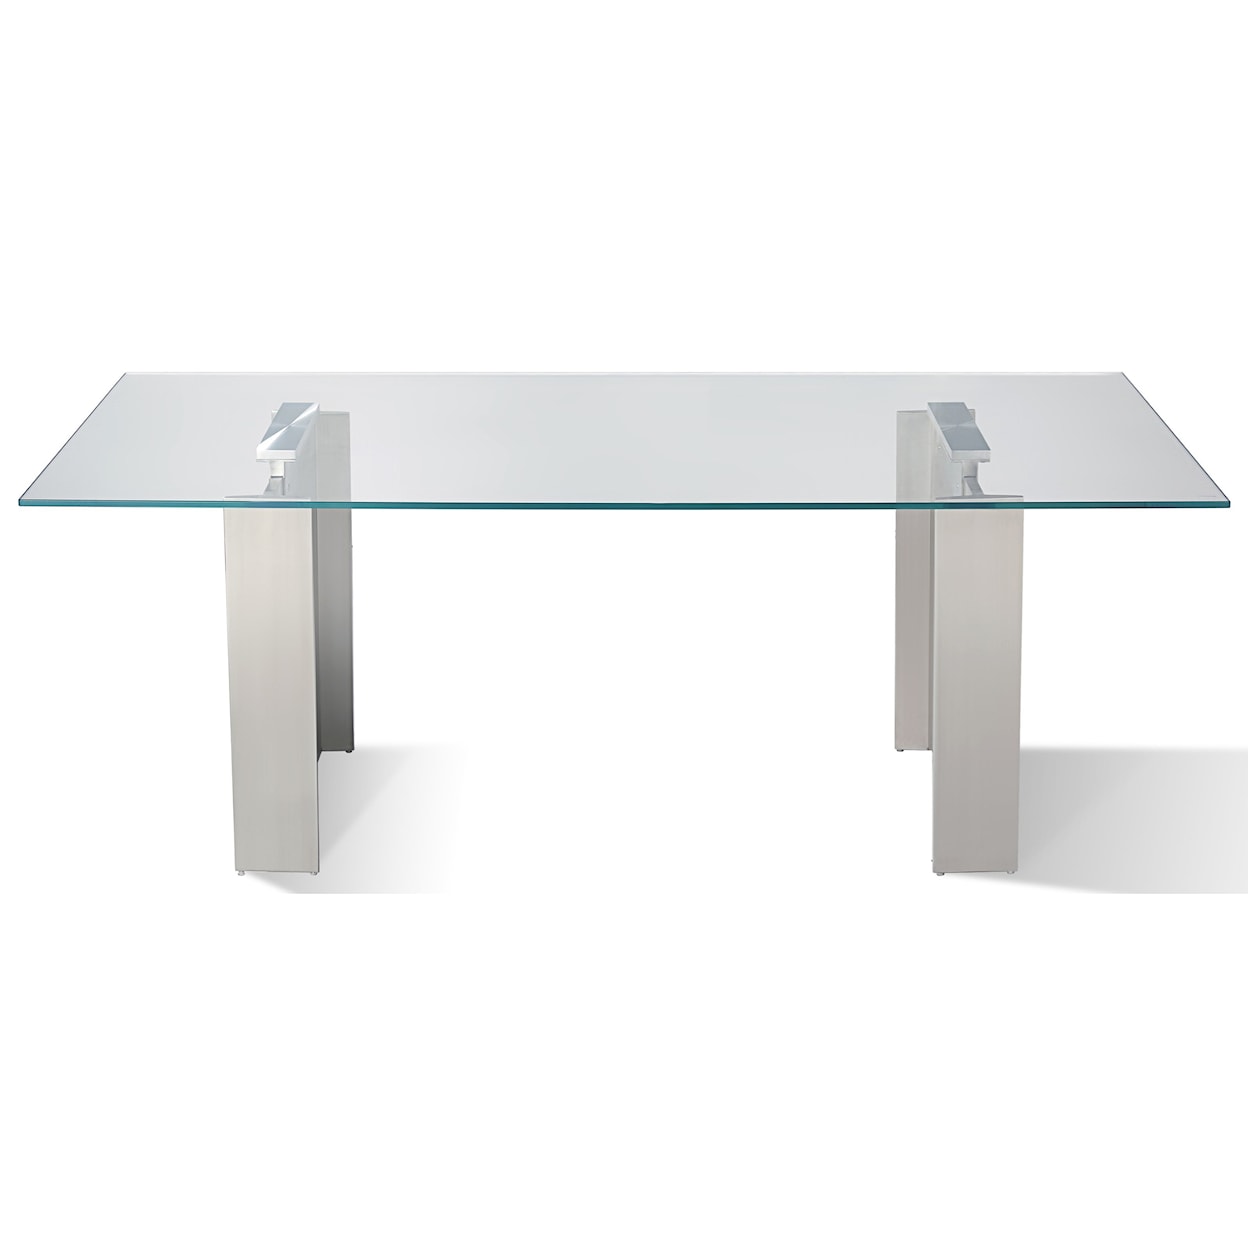 Modus International Omnia 84" Table in Brushed Stainless Steel